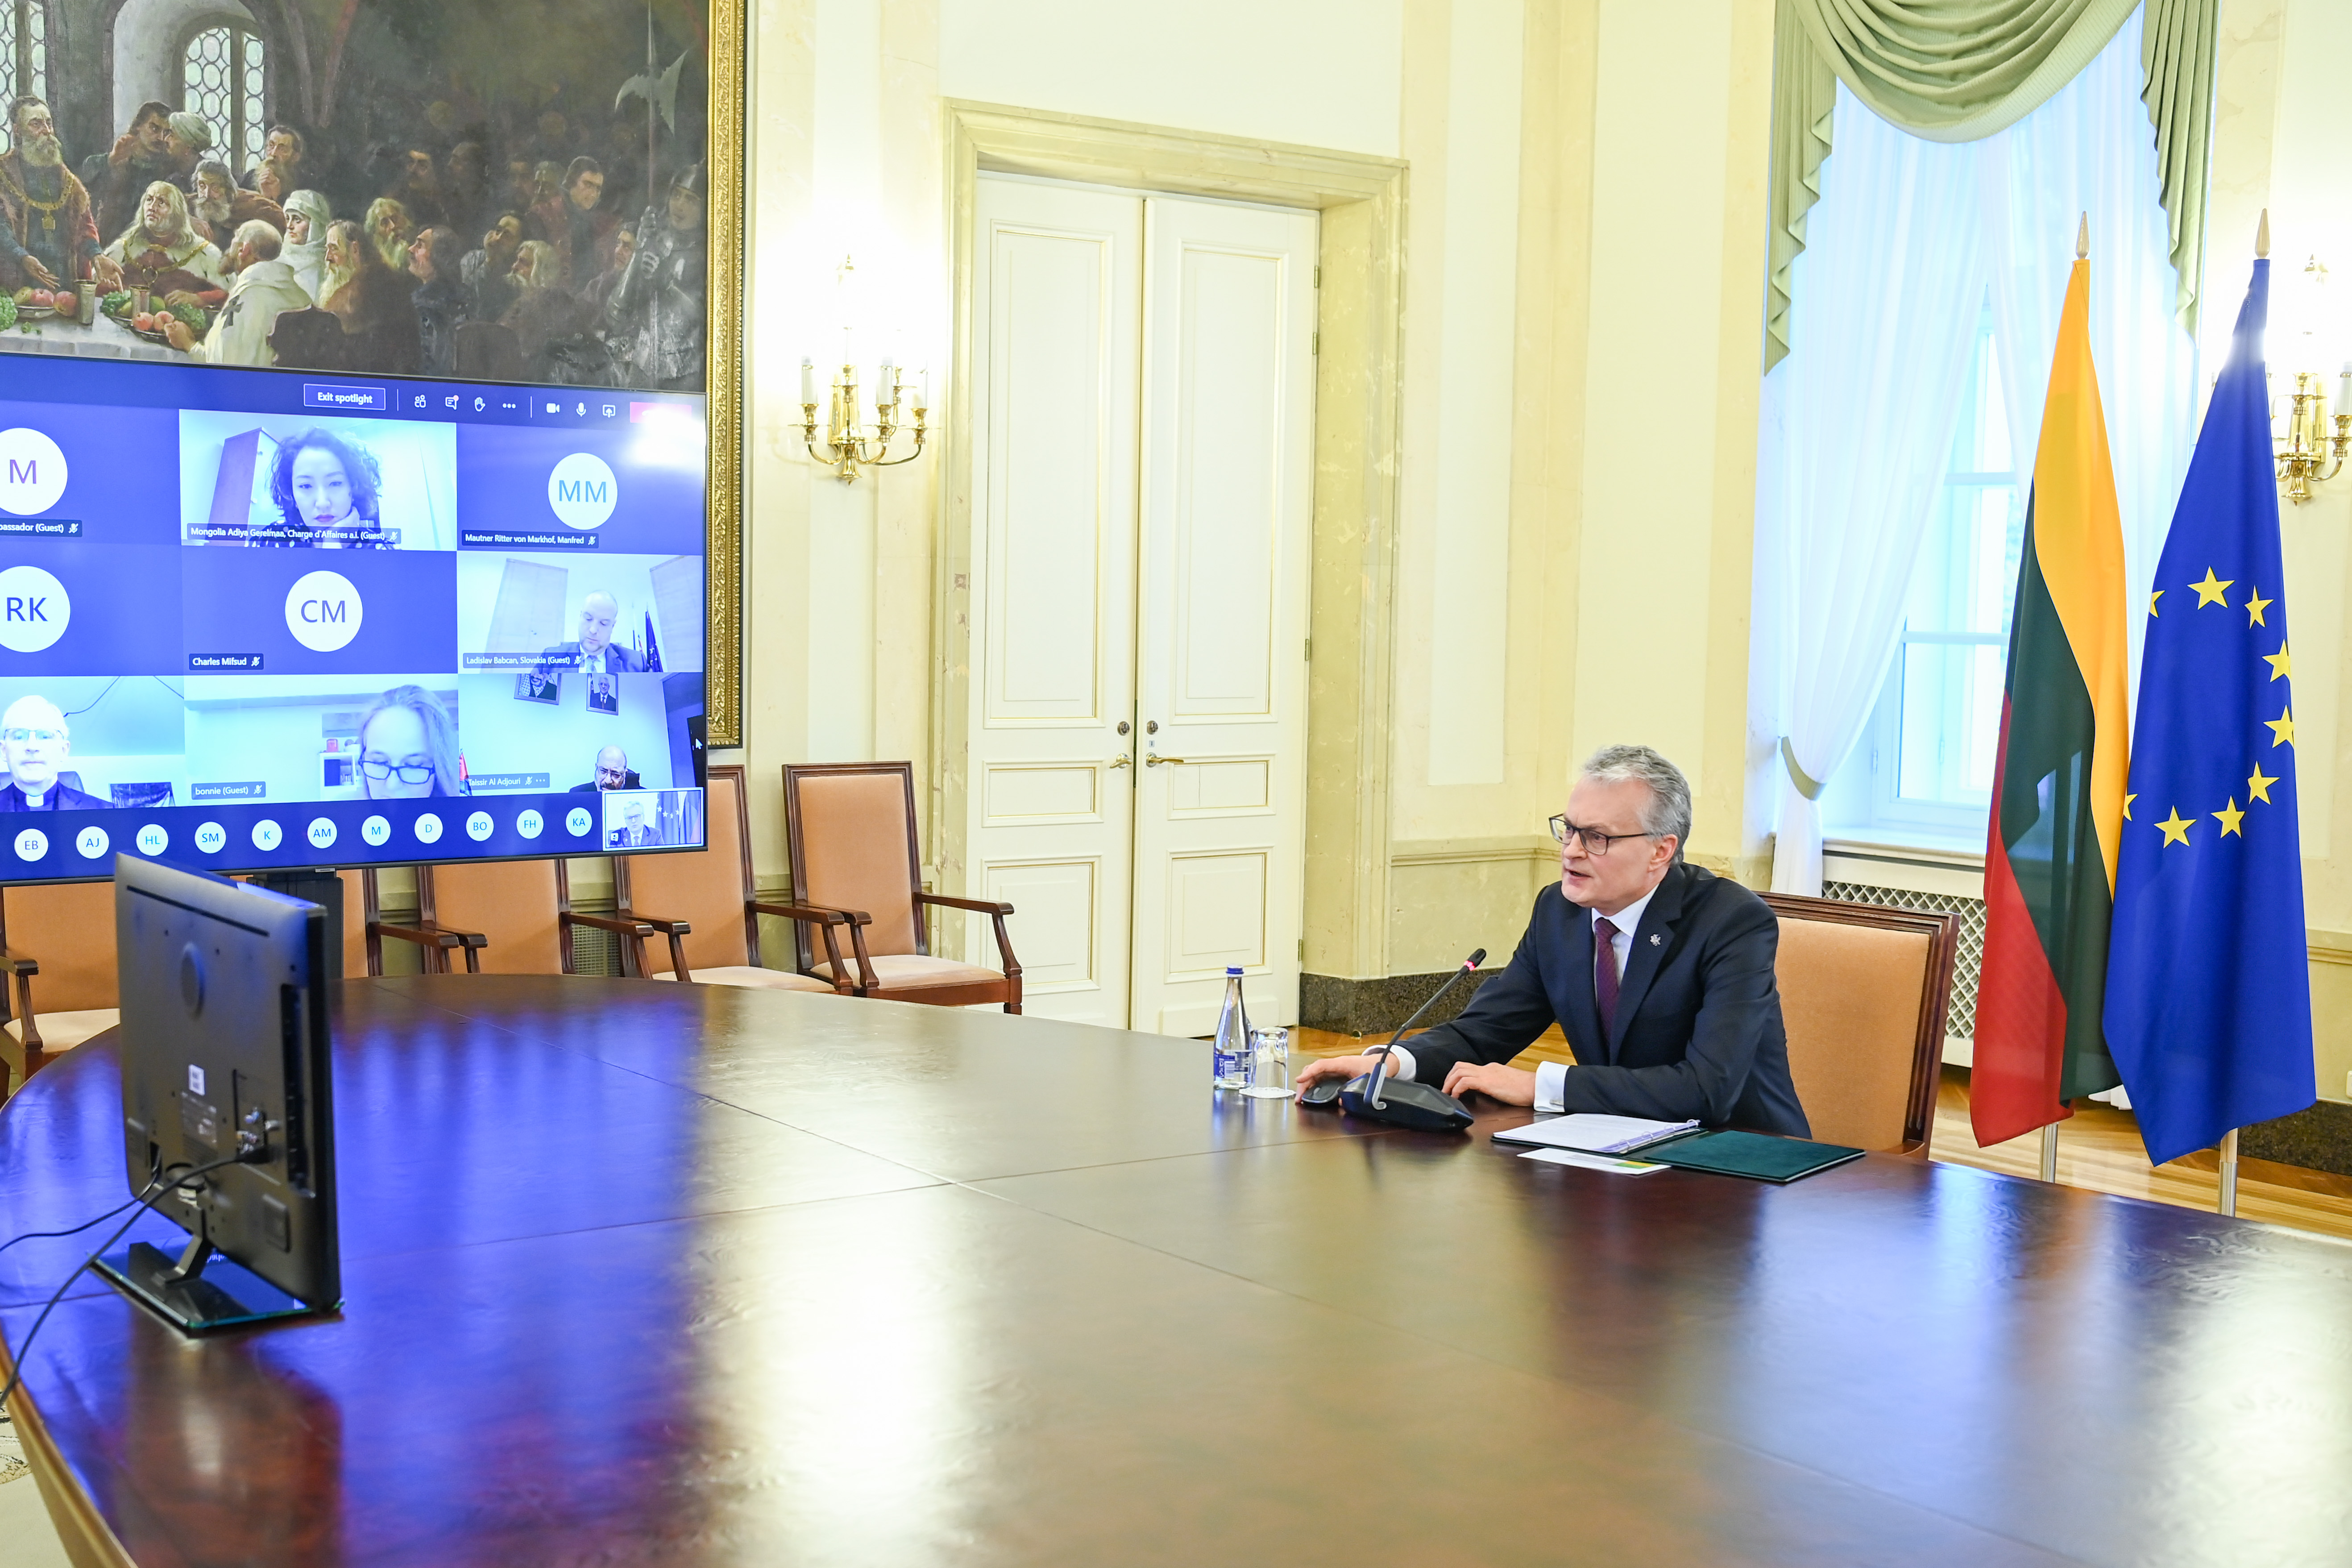 Office of the President of the Republic of Lithuania. Official photo by Robertas Dackus